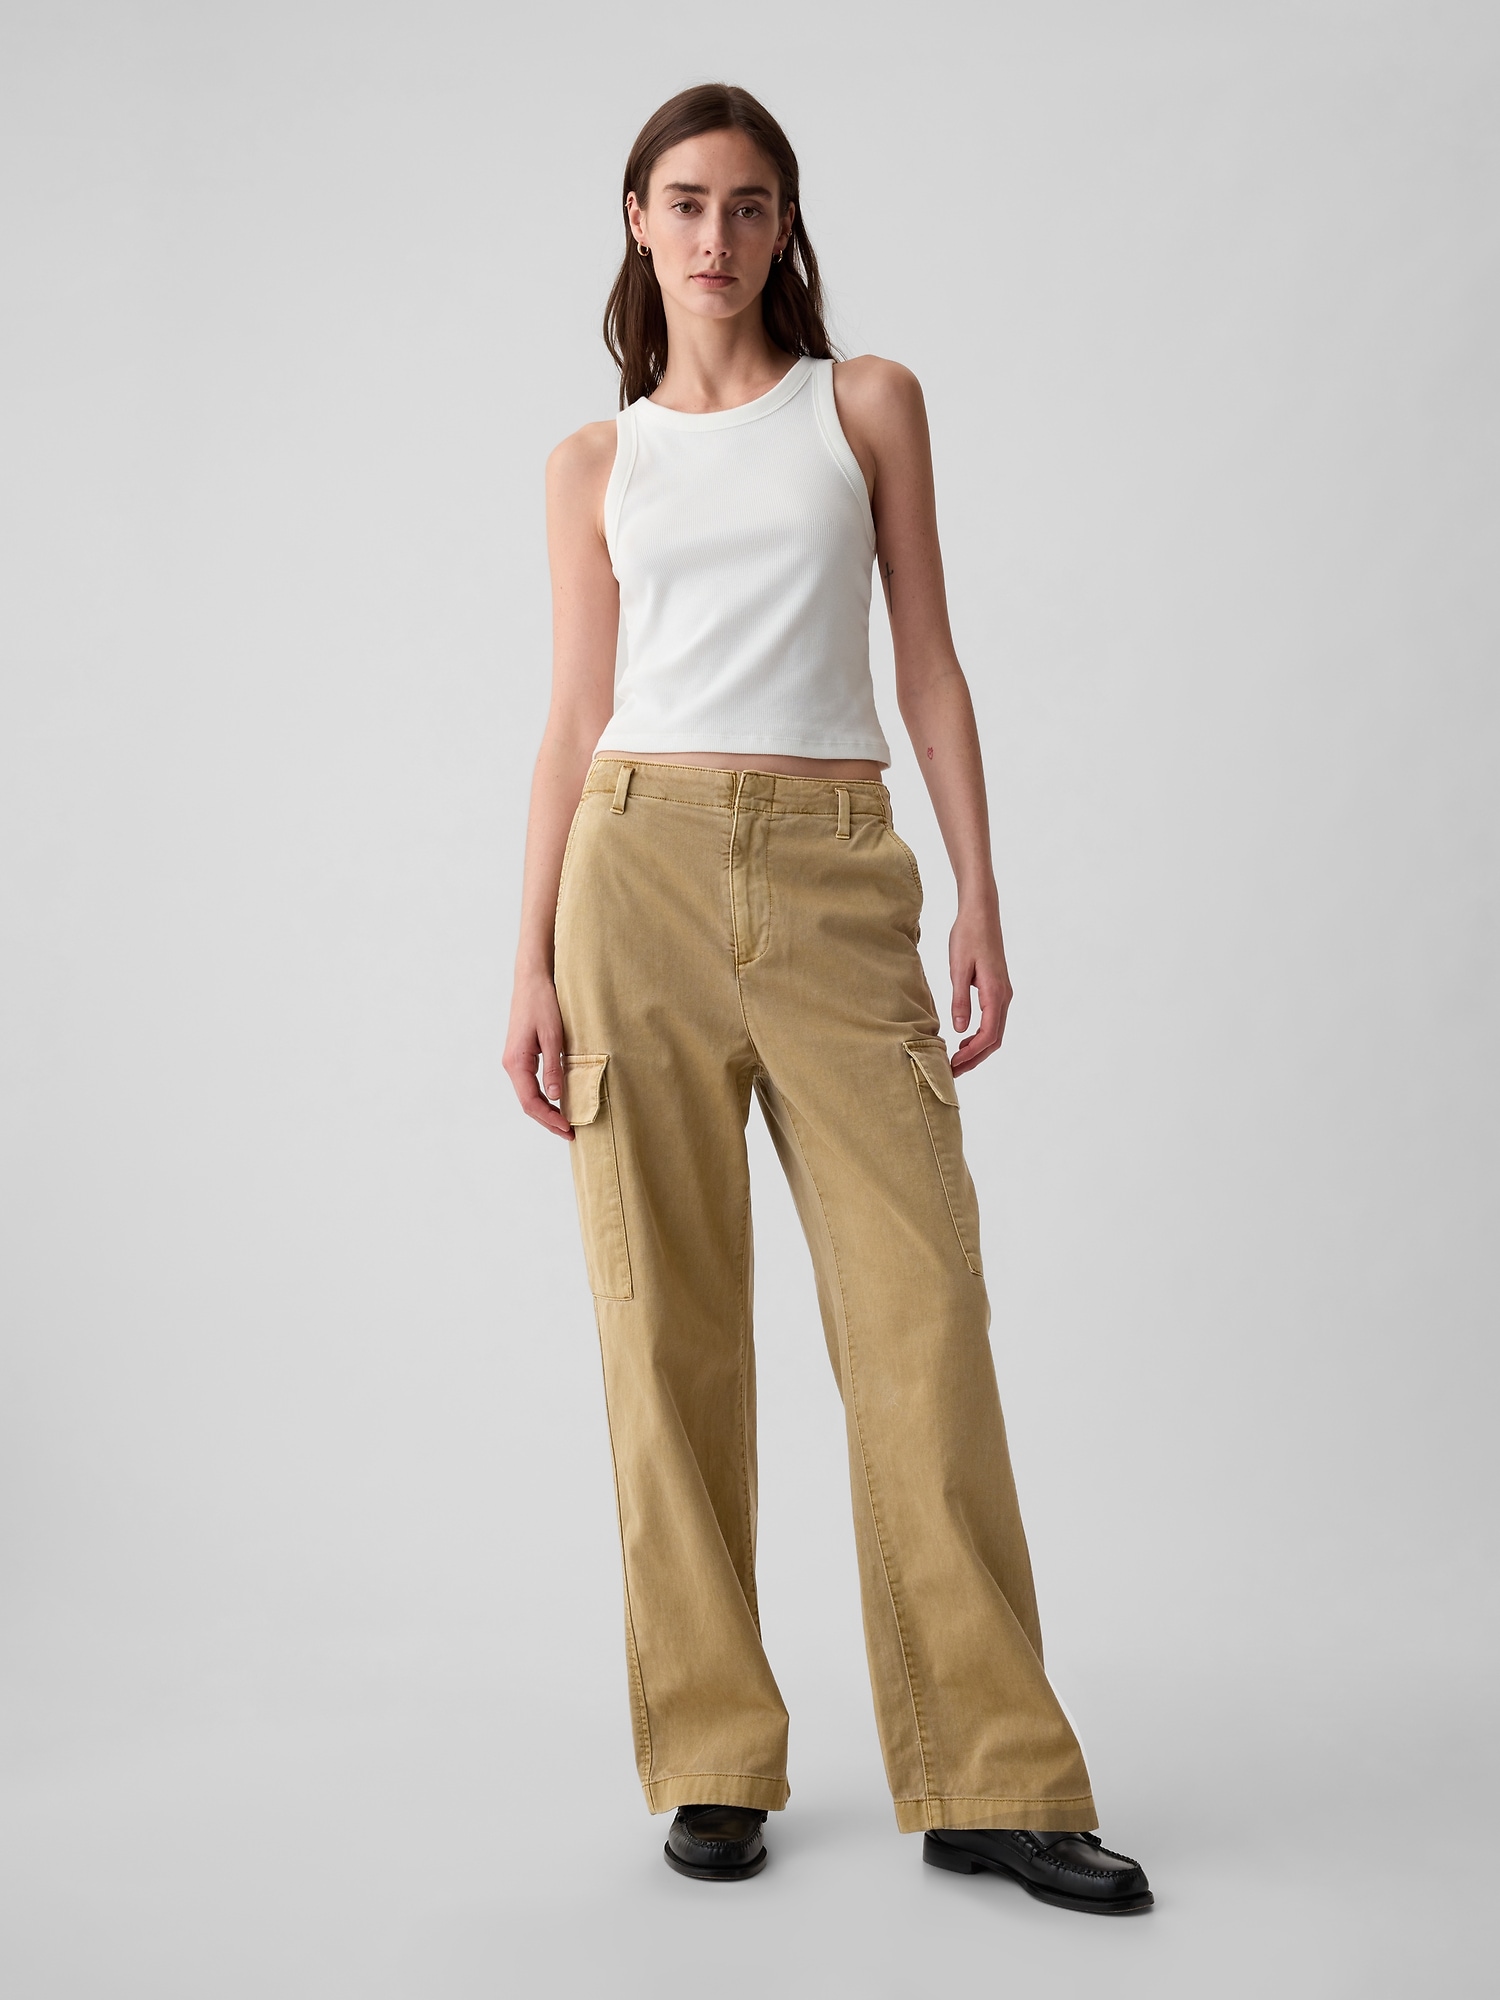 Buy SOLIDBOTTOMS Women's 100% Cotton Casual Pant